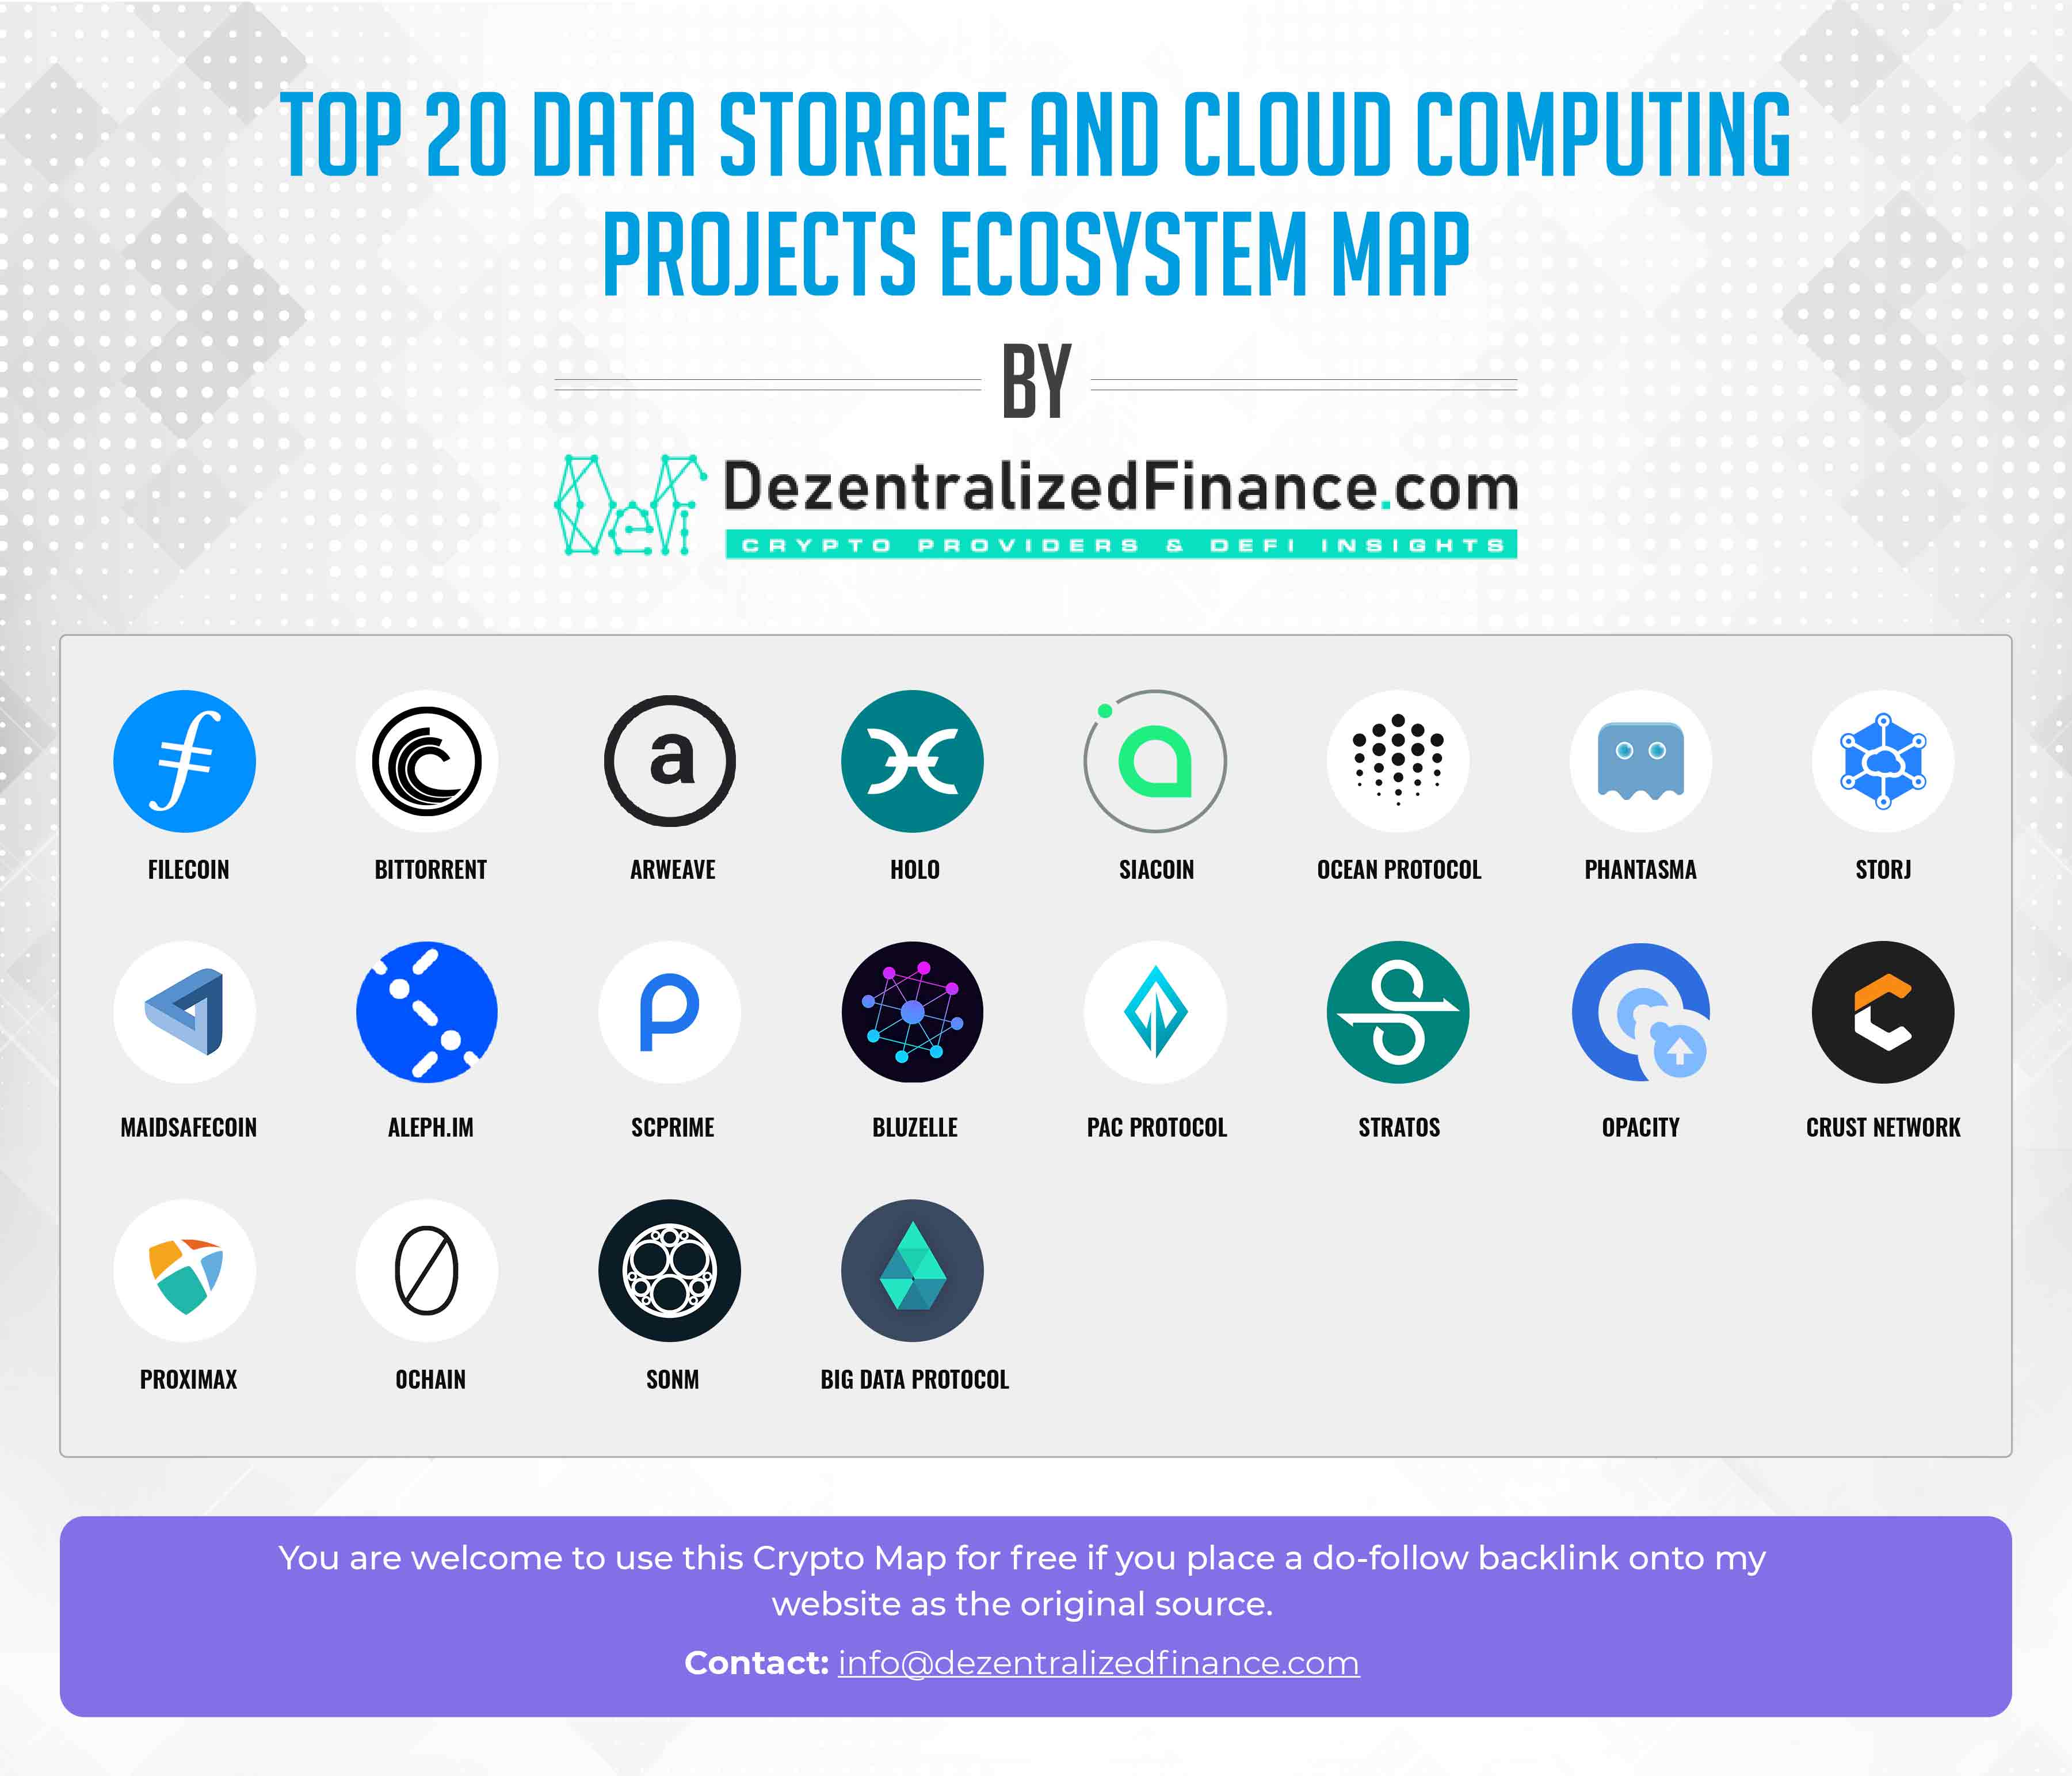 Top 20 Data Storage and Cloud Computing Projects Ecosystem